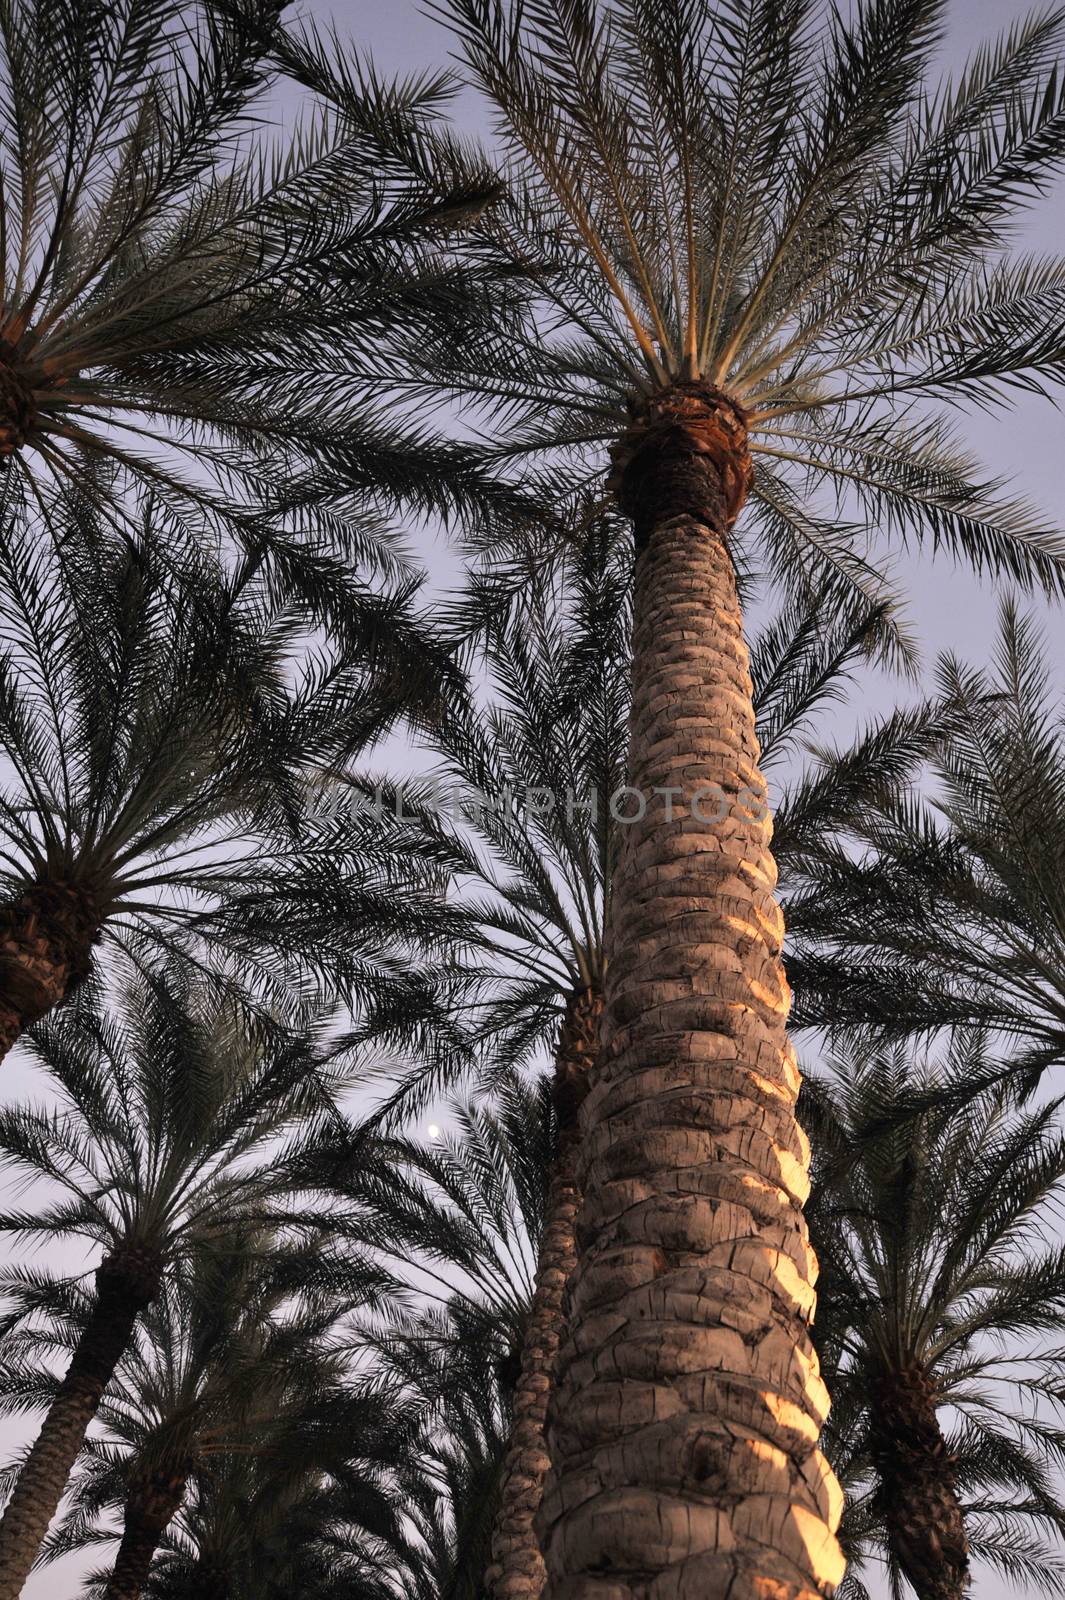 Looking up view of palm trees in early evening